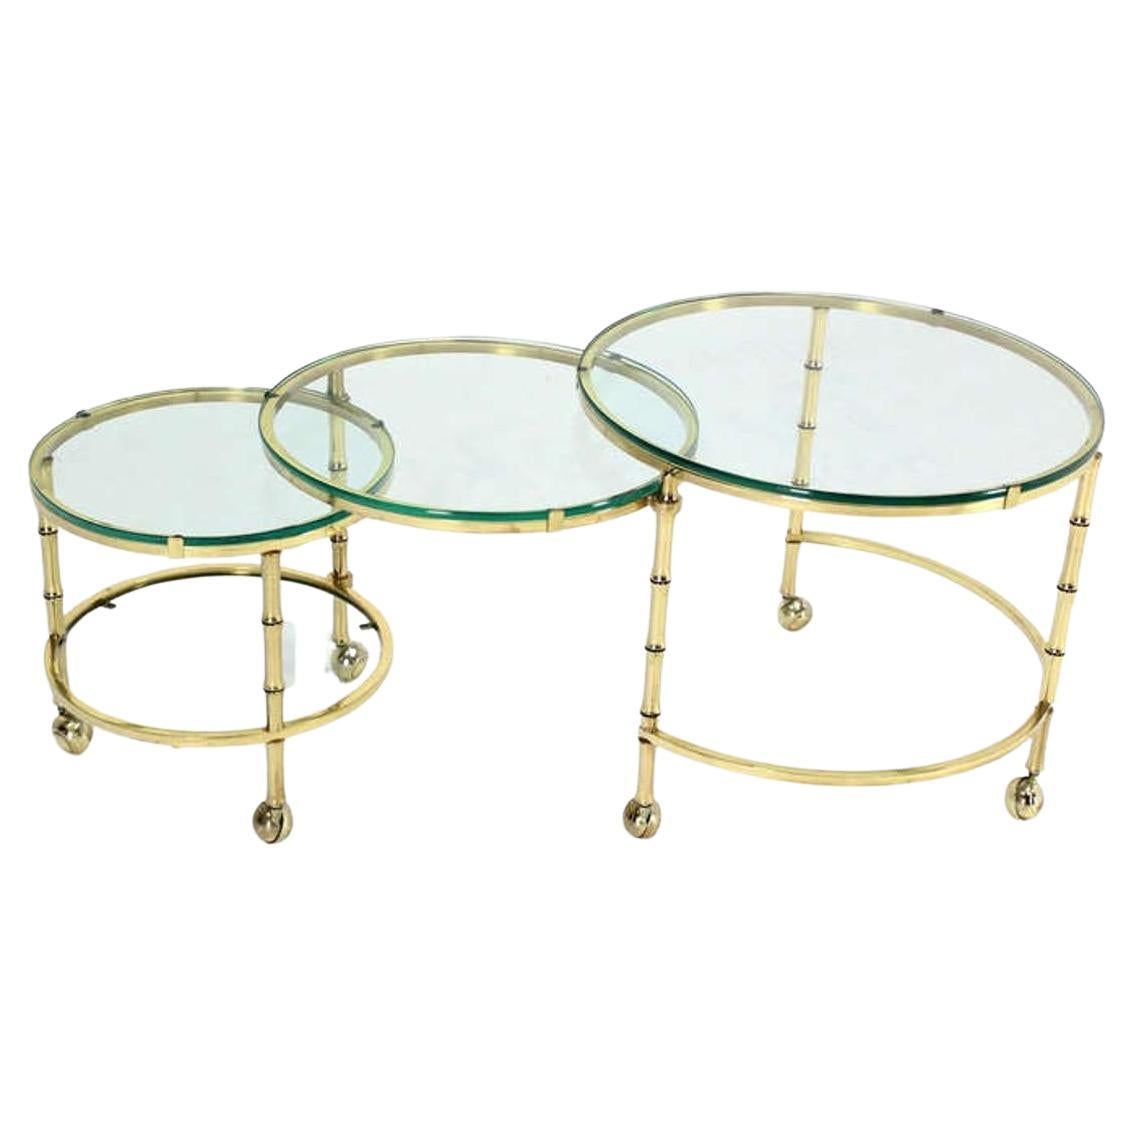 Heavy Solid Bronze Faux Bamboo Expansion Round Nesting Coffee Side Tables MINT! For Sale